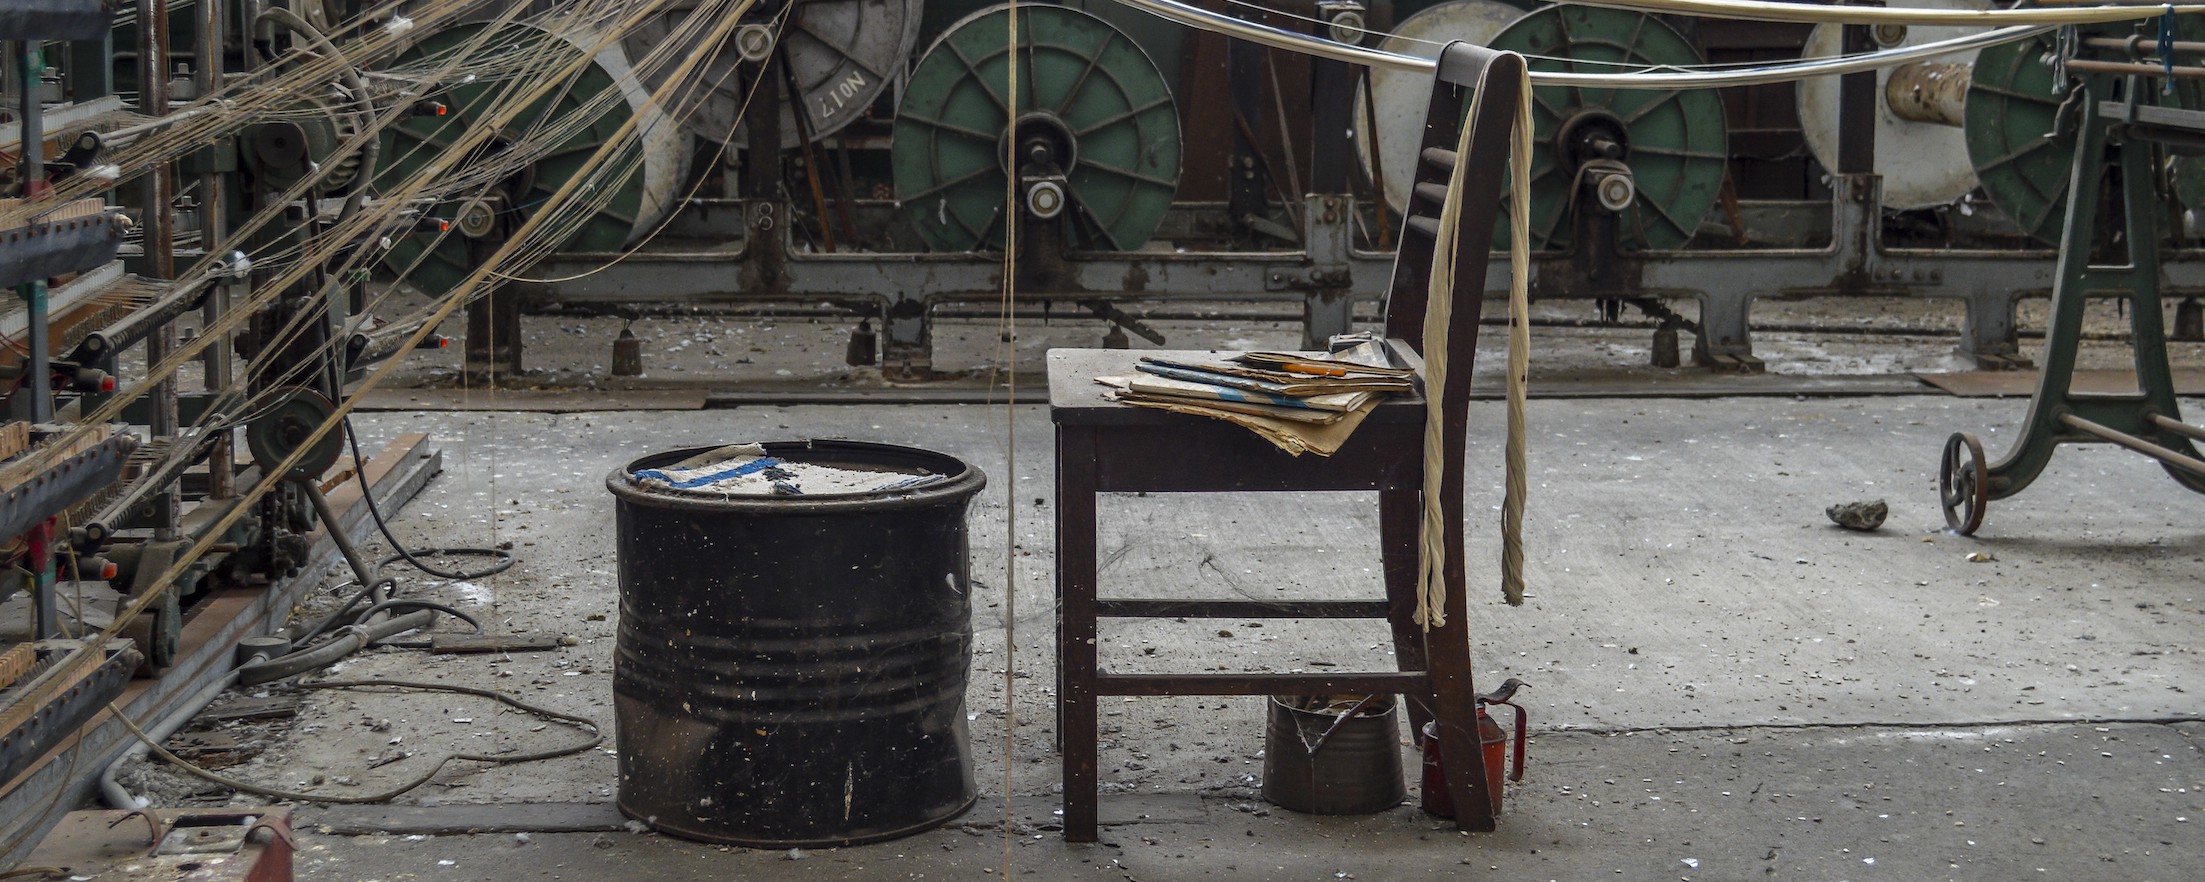 A wooden chair and an oil drum in a derelict textile workshop.